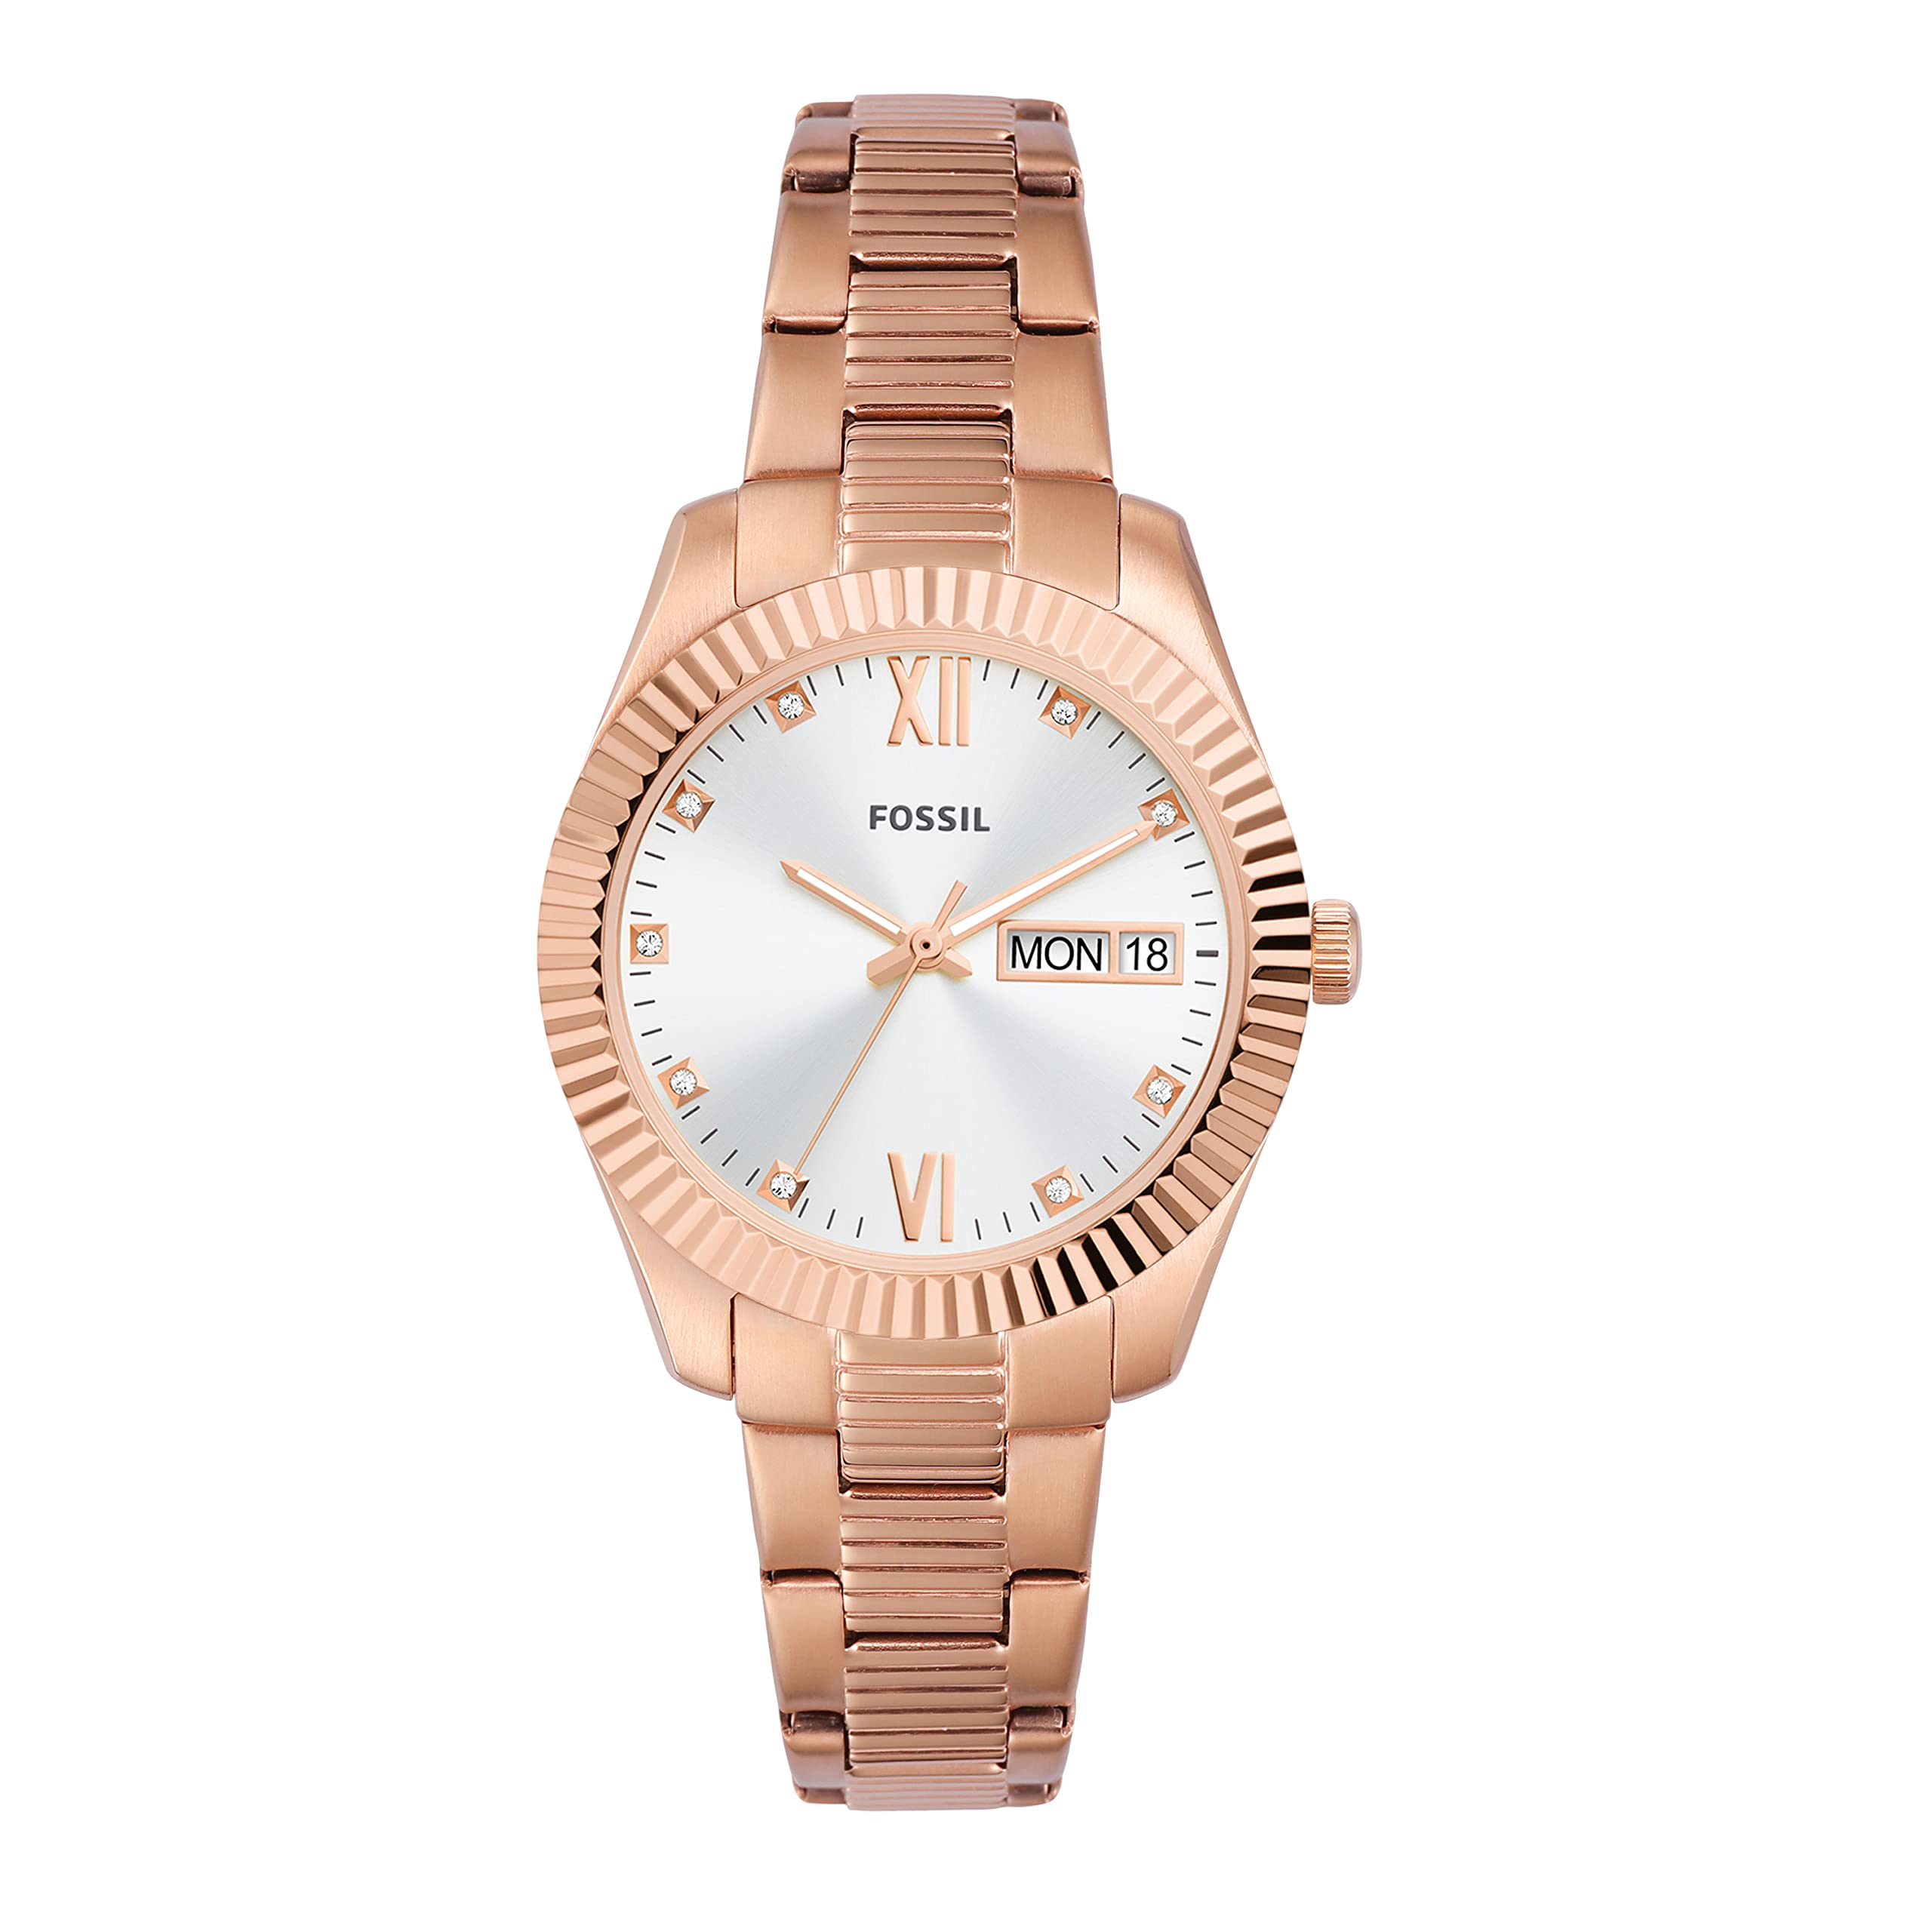 32mm Fossil Women's Scarlette Stainless Steel Quartz Watch (Rose Gold/Silver) $56 + Free Shipping